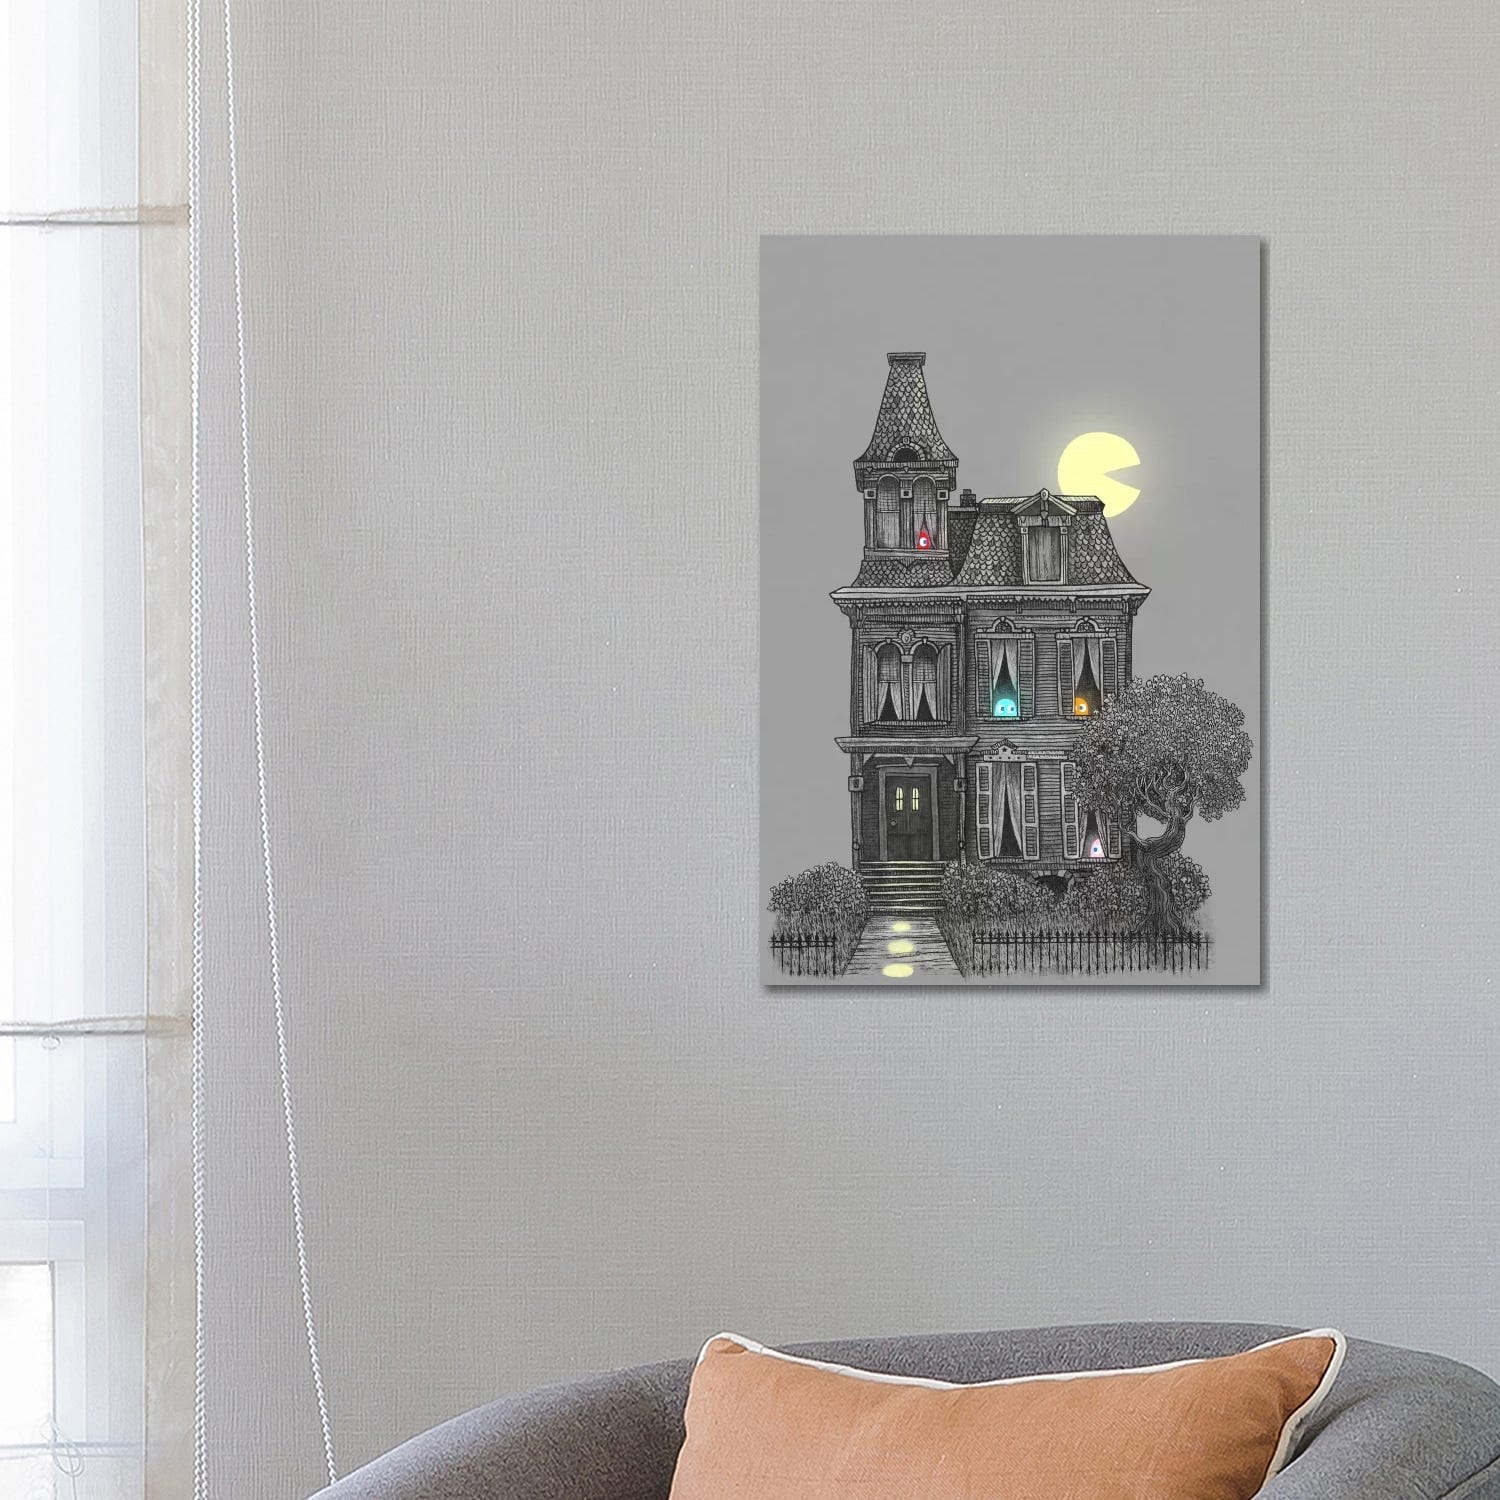 iCanvas 'Haunted' by The 80's' by Terry Fan Canvas Print 